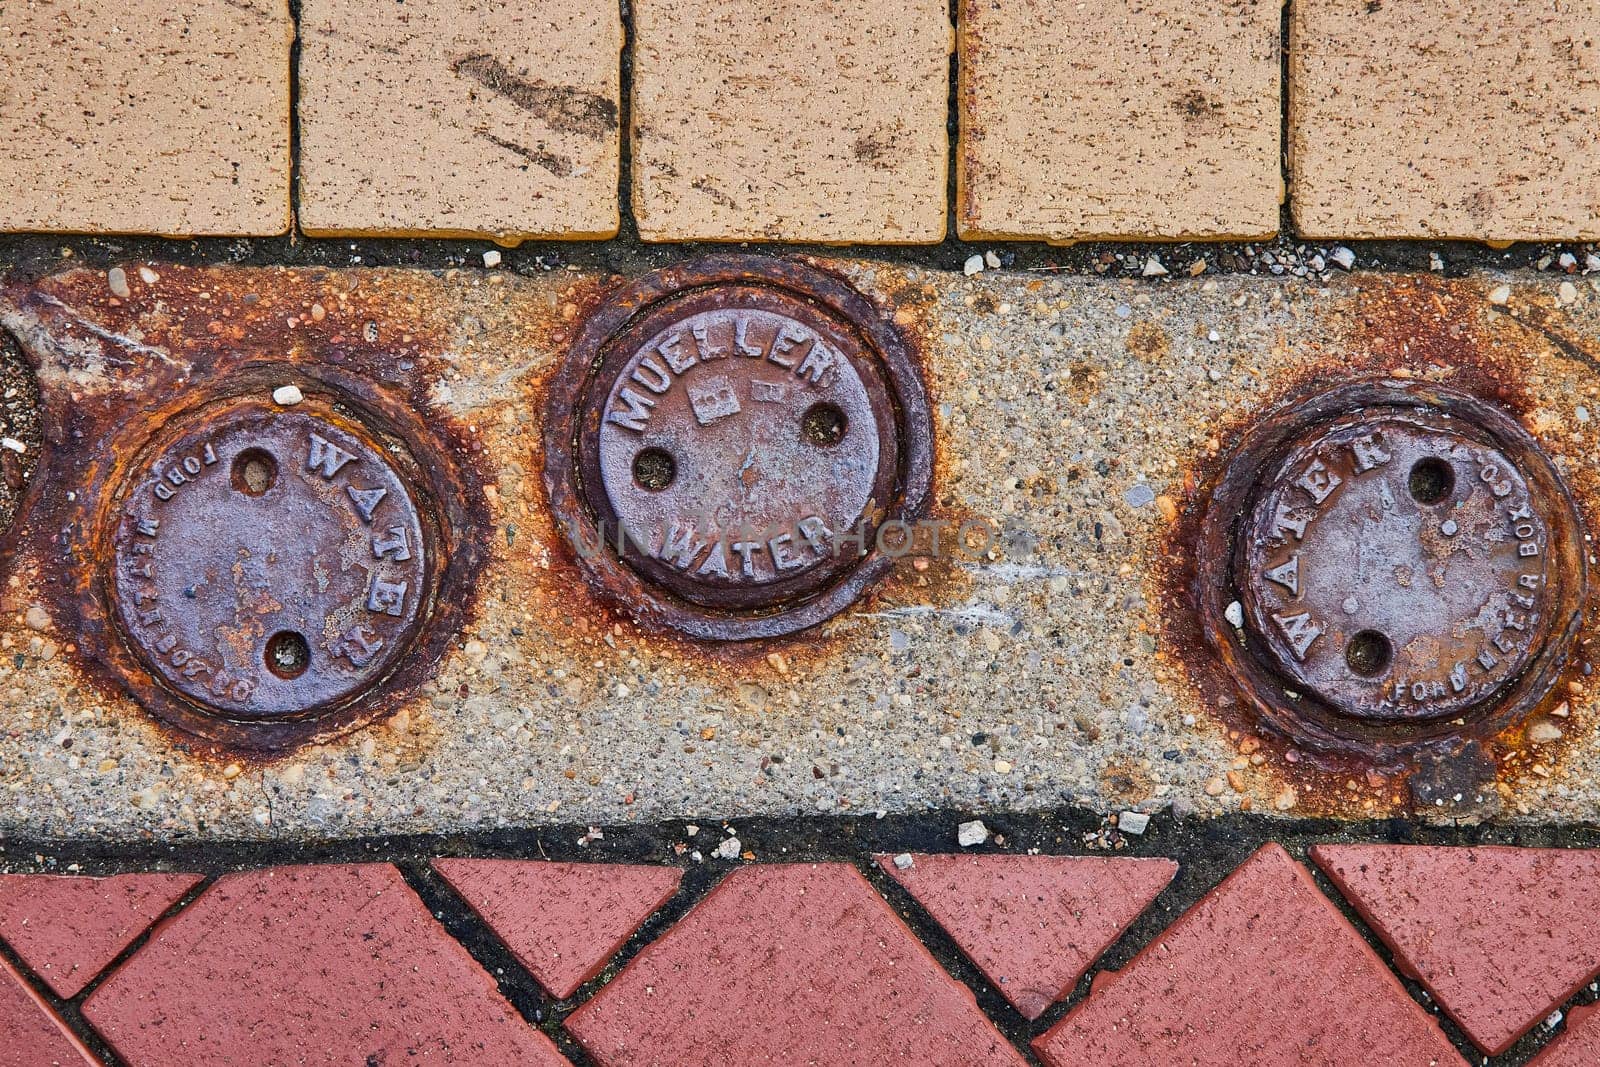 Rusty Water Utility Covers on Textured Urban Pavement by njproductions